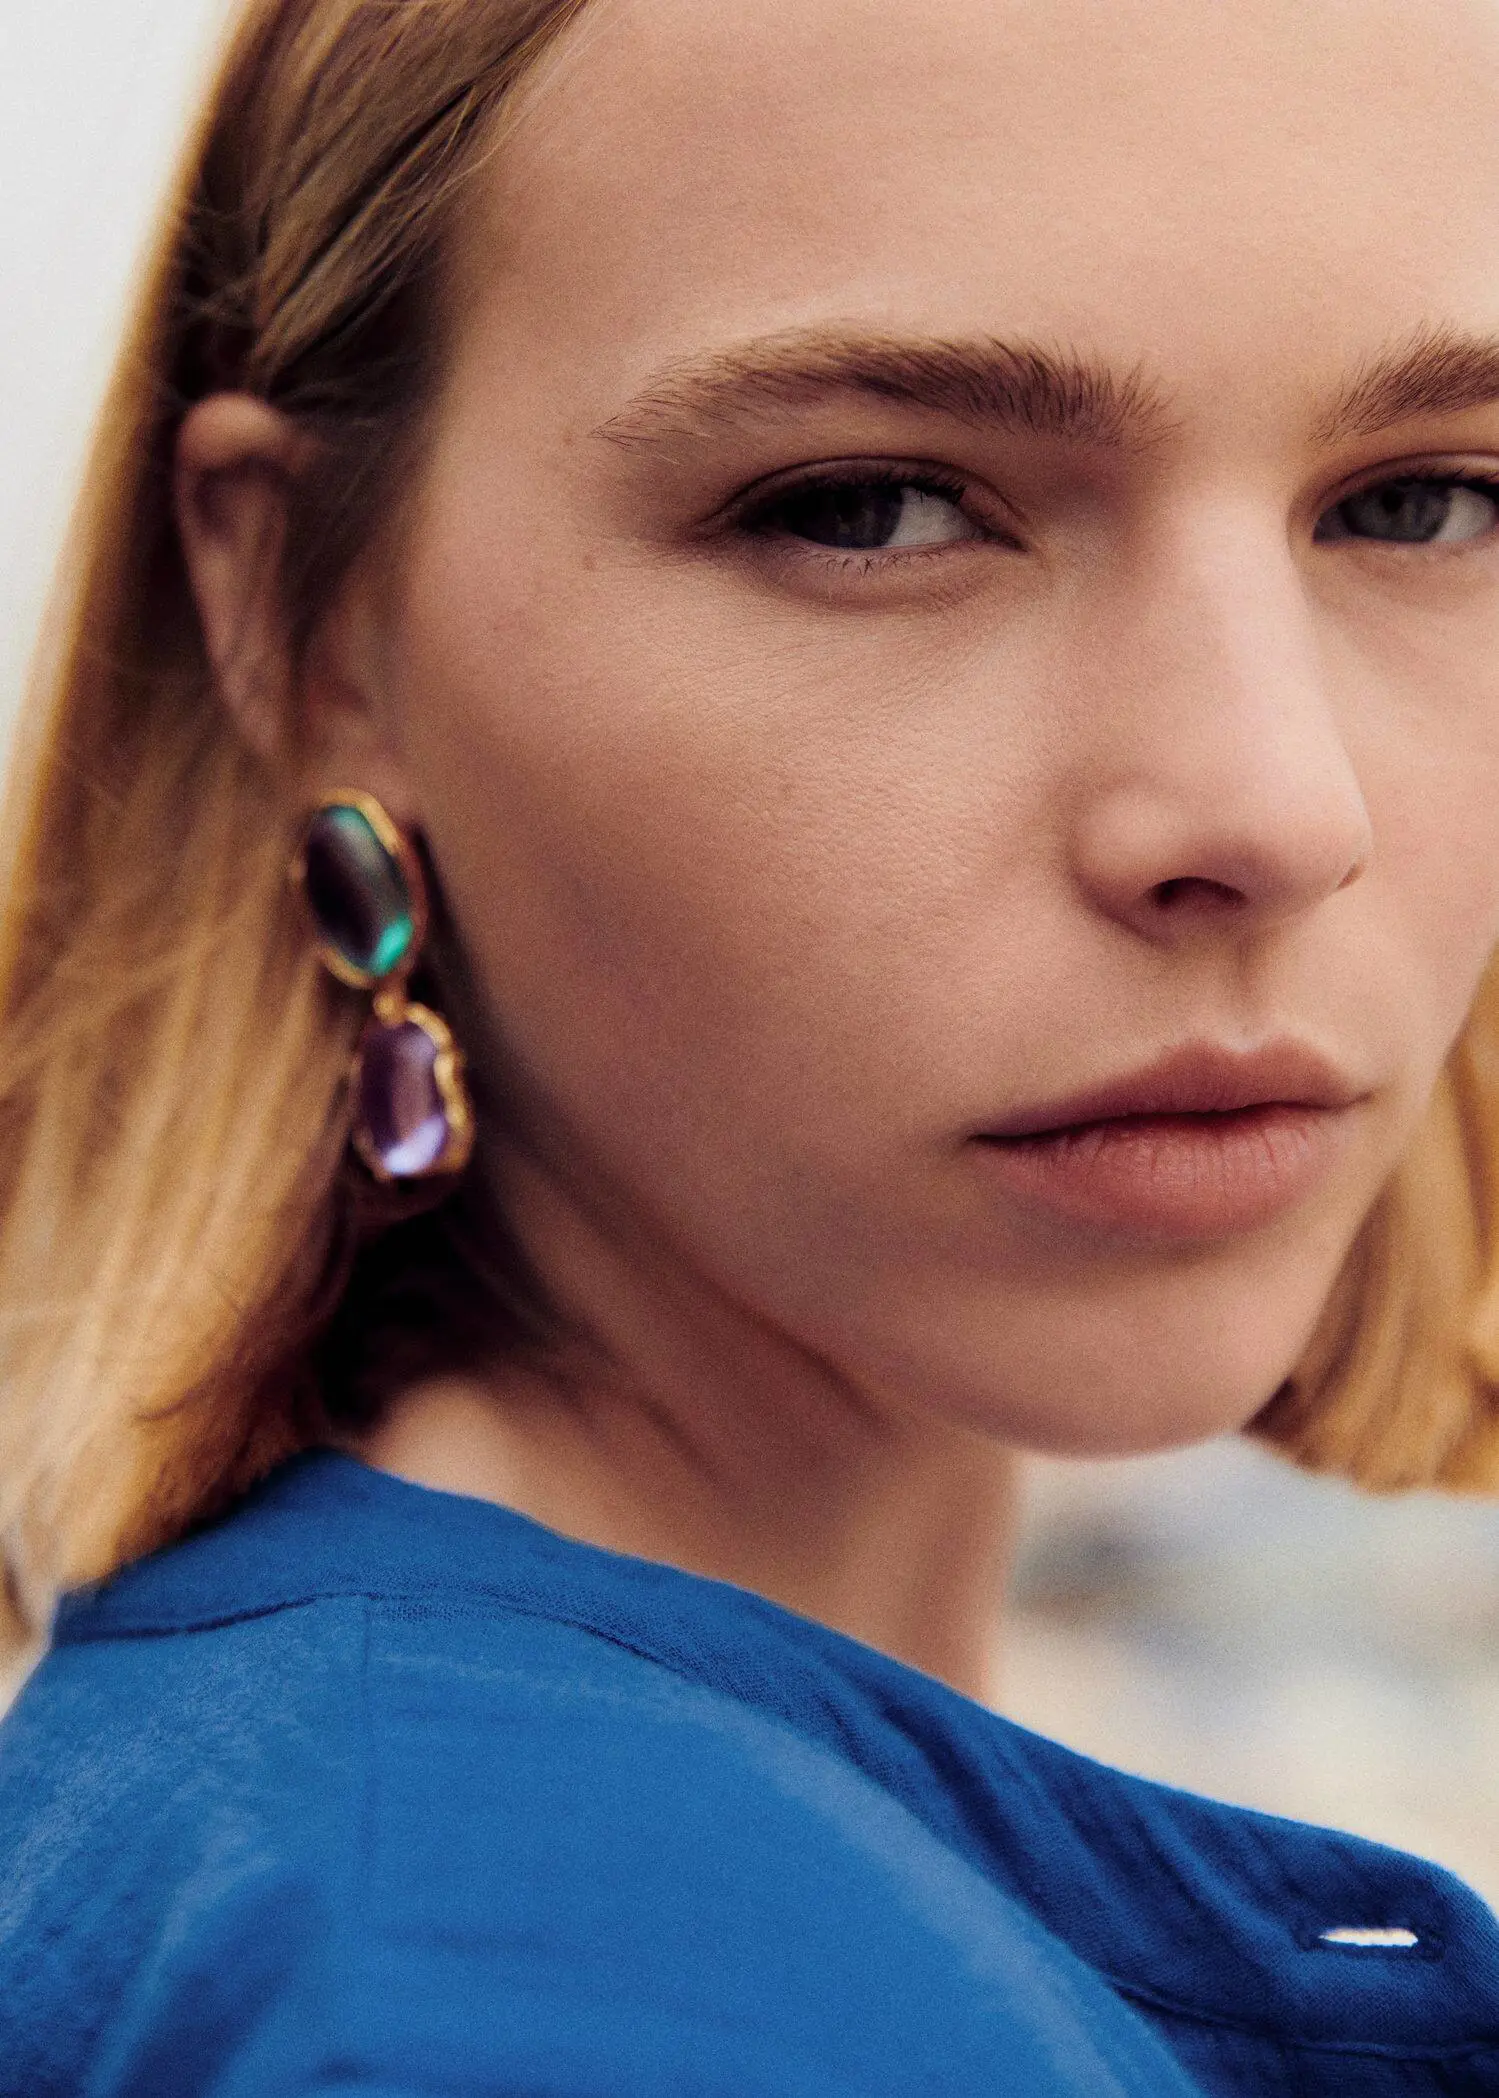 Mango Combined stone earrings. a close up of a person wearing a blue shirt 